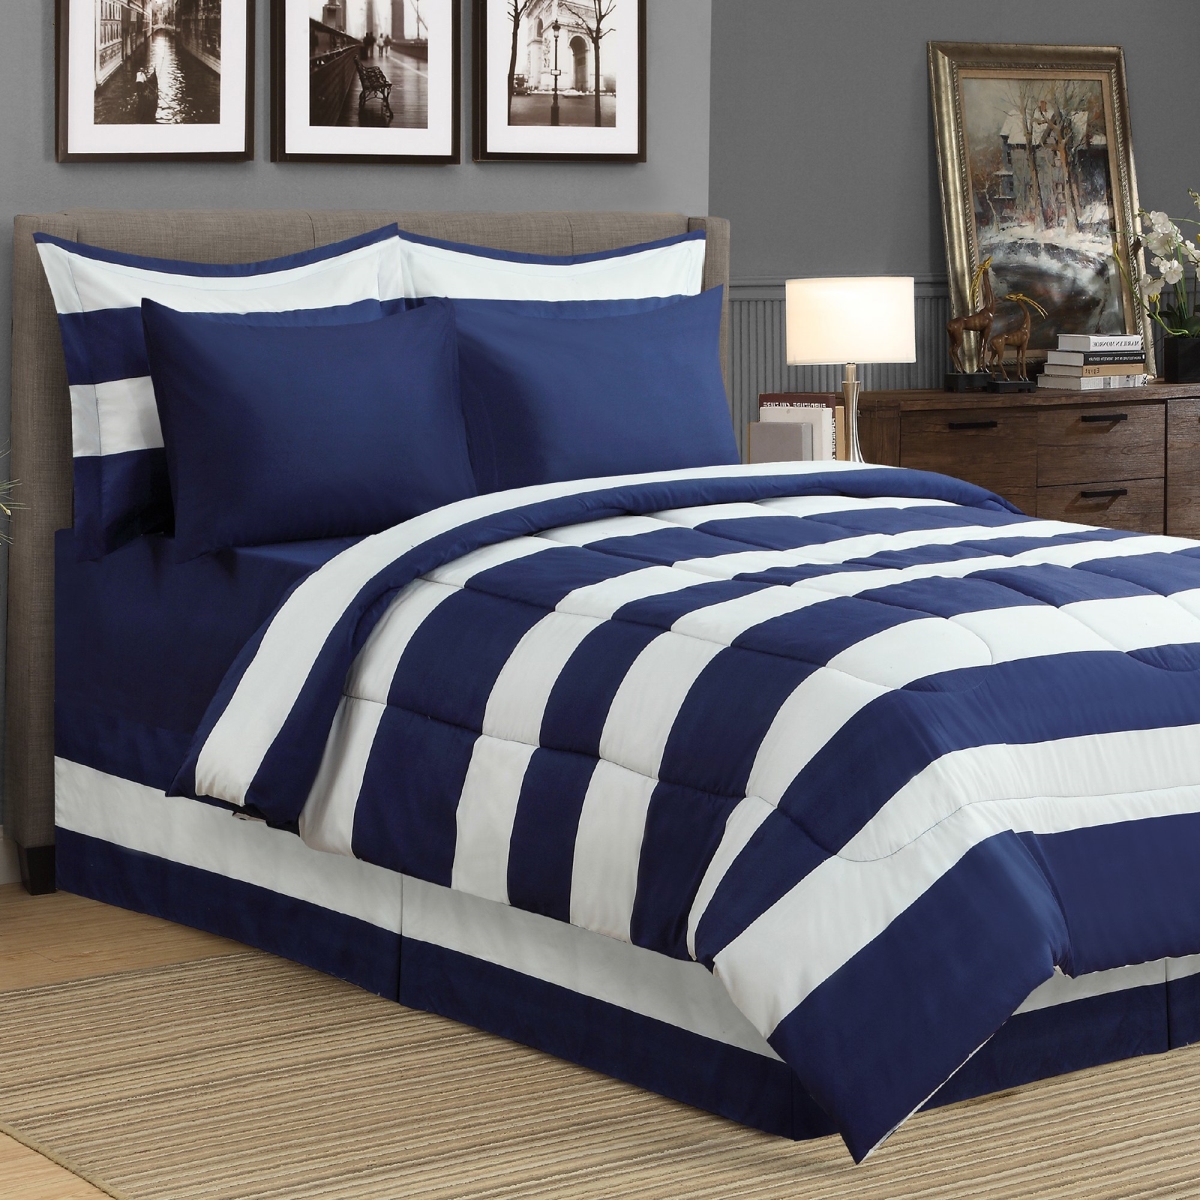 8 Piece Hamshire Bed In A Bag Comforter Set, Navy Blue - Double Size